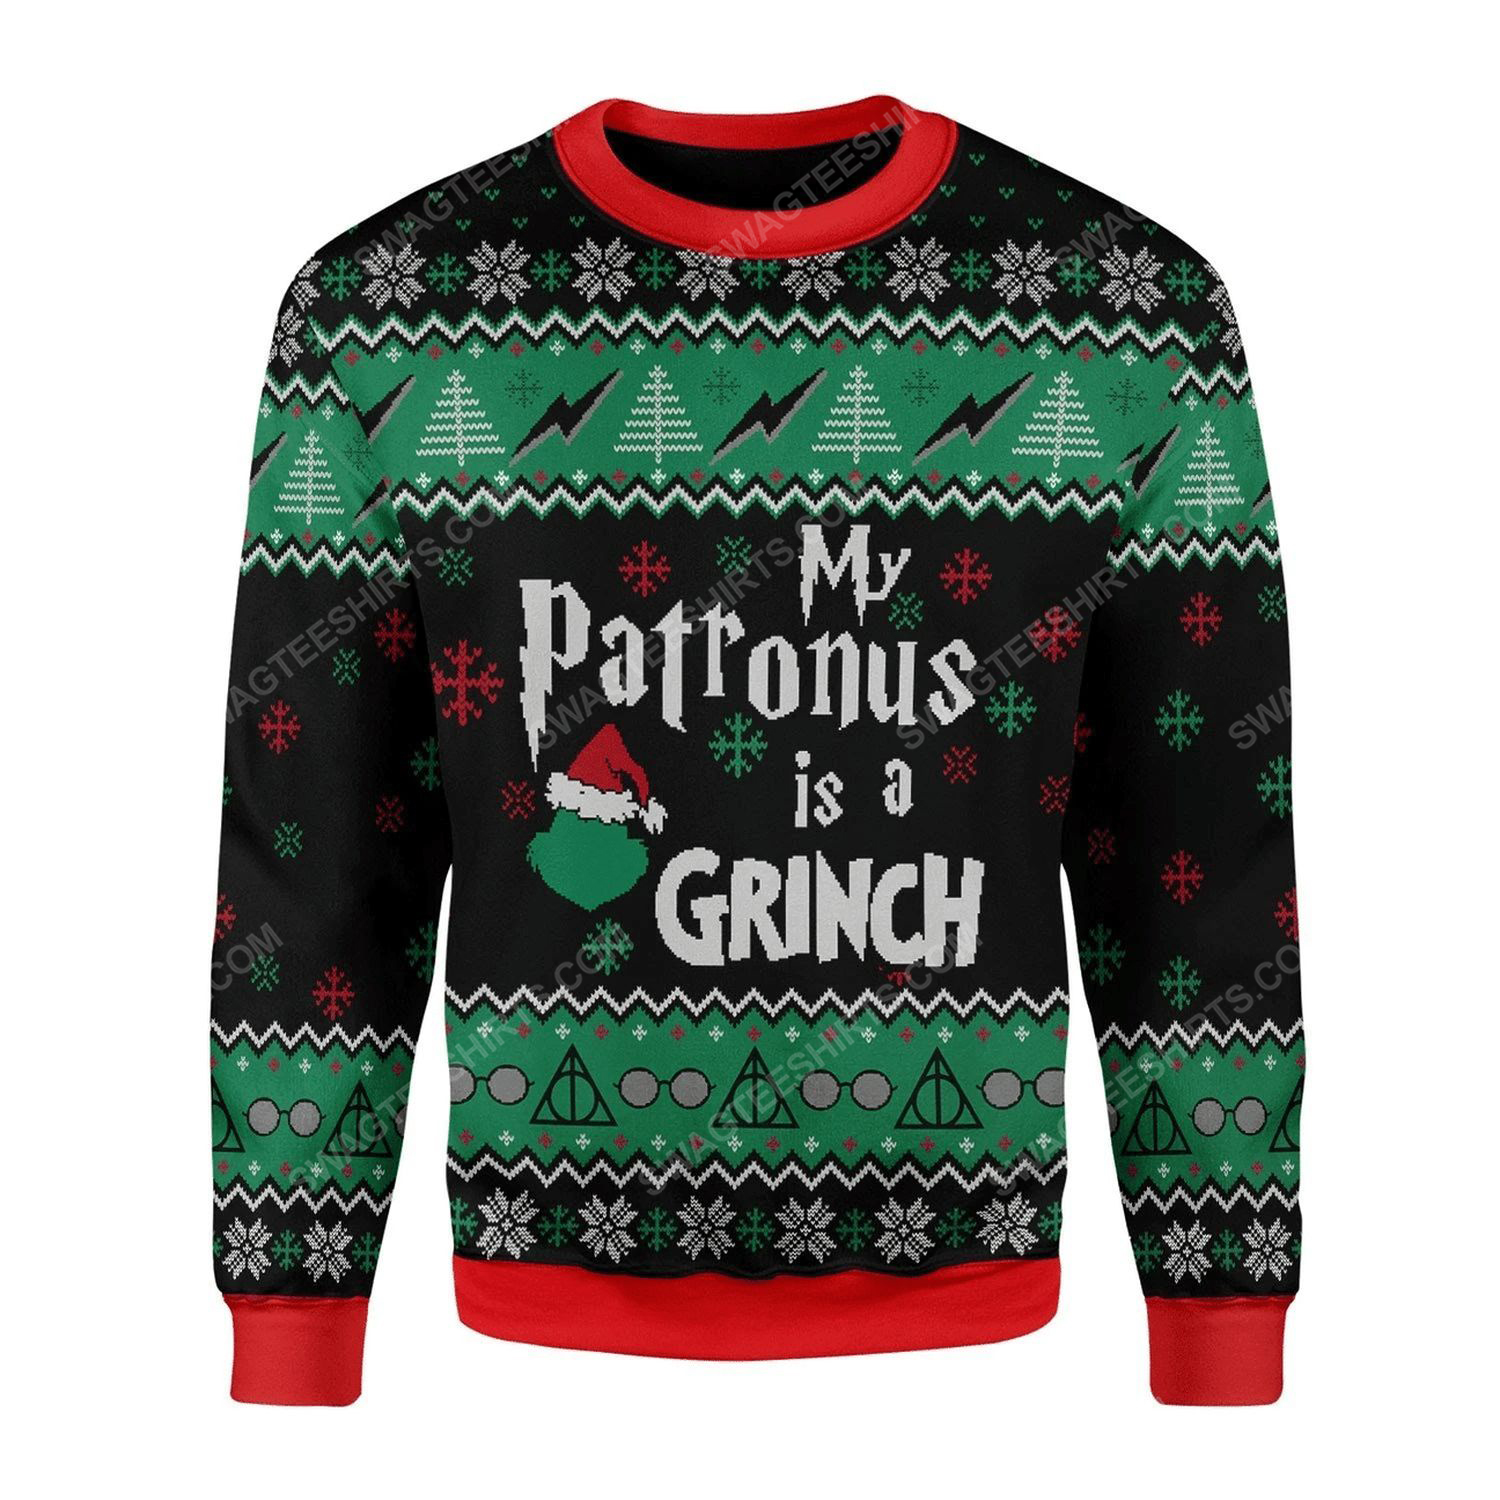 My patronus is the grinch ugly christmas sweater - Copy (2)